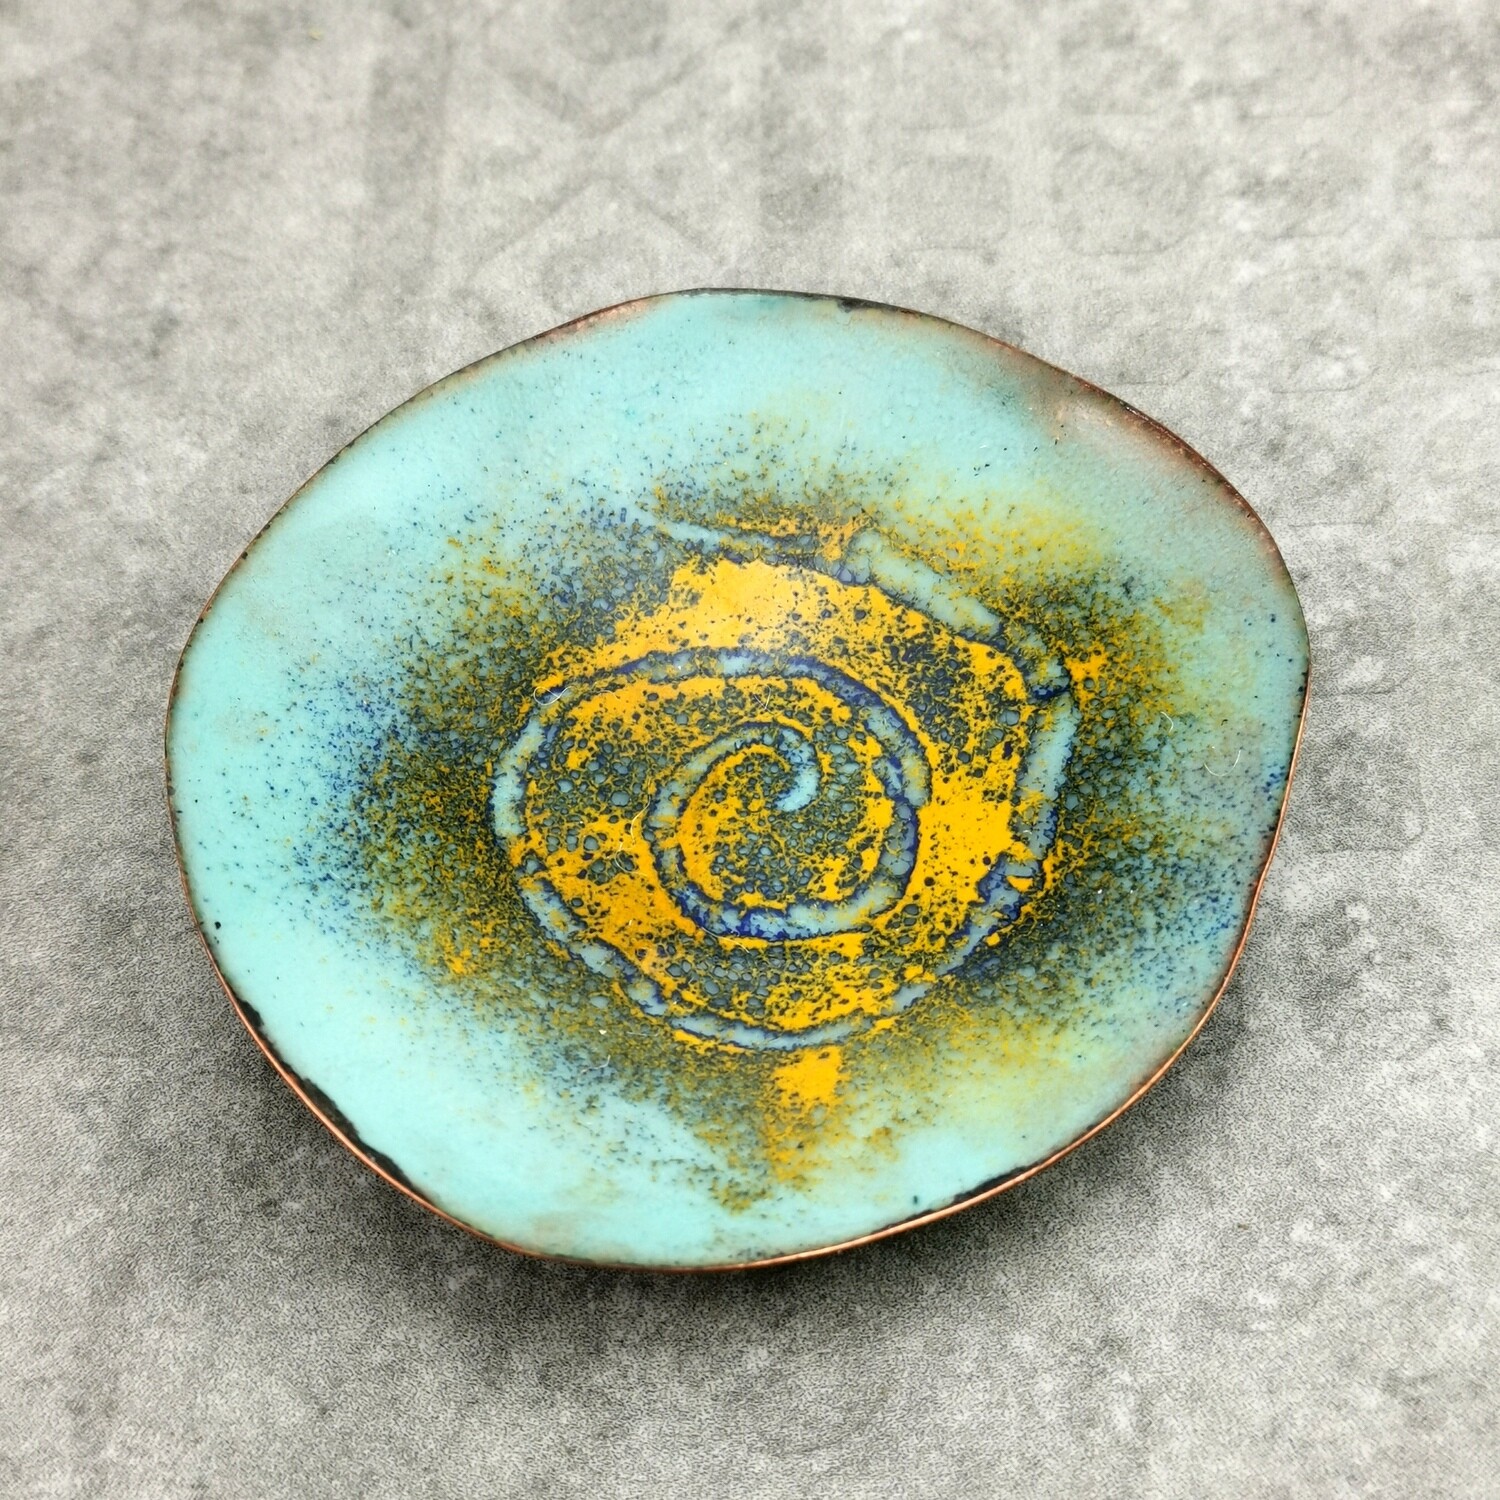 Small Hand Forged Copper Dish, Handmade Enamel Dish, Organic Shaped Dish, 7 Year Anniversary for Her, 7th Anniversary Gift